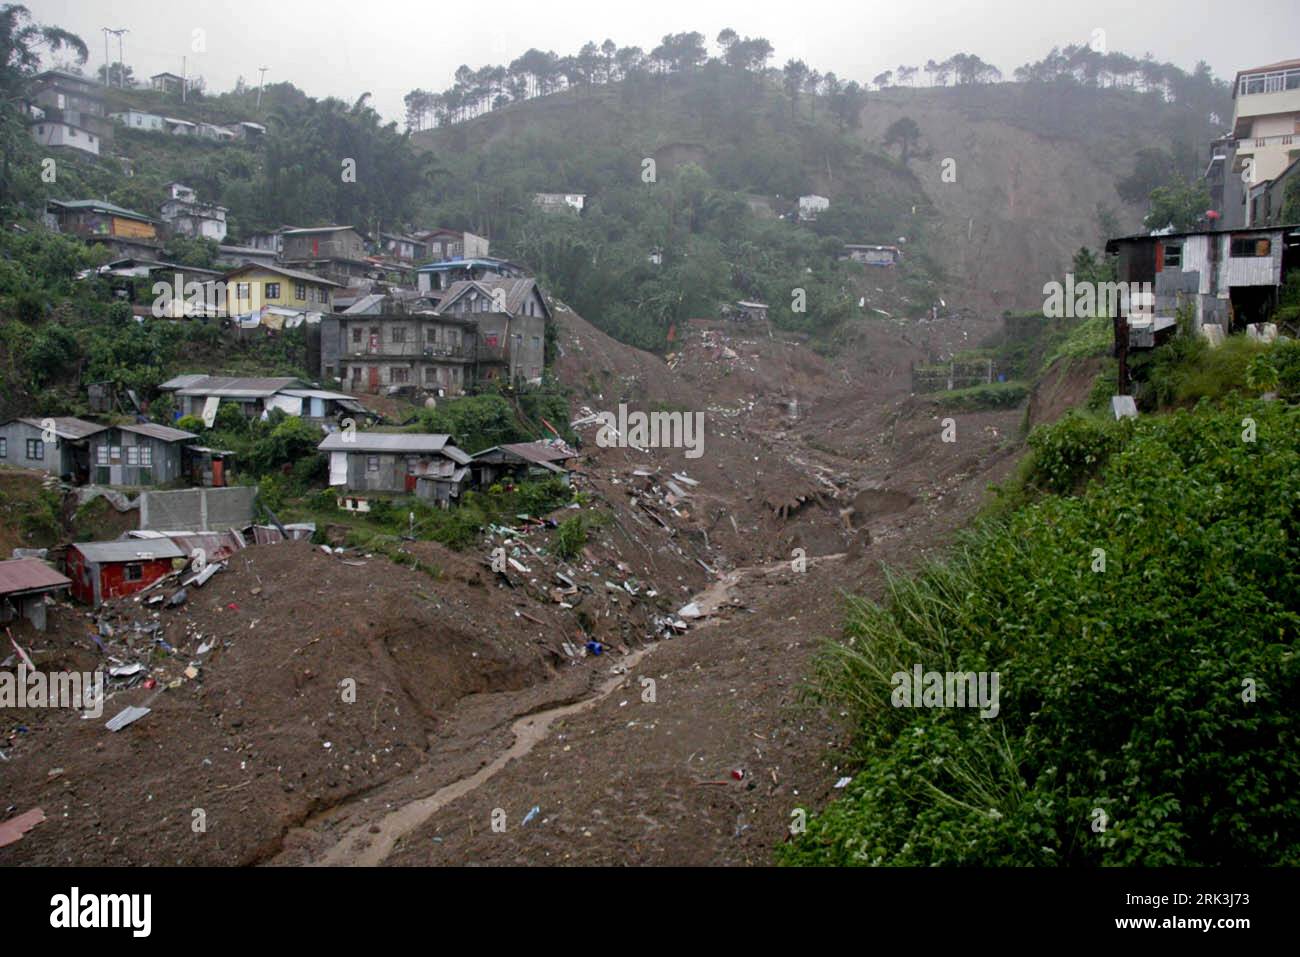 Bildnummer: 53521045  Datum: 09.10.2009  Copyright: imago/Xinhua (091009) -- Manila, Oct. 9, 2009 (Xinhua) -- Buildings are buried by mudslide in Baguio City, in northern Philippines, Oct. 9, 2009. At least 43 persons were killed and 150 are still missing in Central and Northern Luzon in northern Philippines affected by flooding and mudslide in the wake of Typhoon Pepeng ( Parma ). (Xinhua/Dave Leprozo) (zw) (2)PHILIPPINES-PEPENG-AFTERMATH PUBLICATIONxNOTxINxCHN Philippinen Naturkatastrophen Taifun Pepeng Zerstörung Premiumd kbdig xub 2009 quer o0 Schäden o00 Erdrutsch    Bildnummer 53521045 D Stock Photo